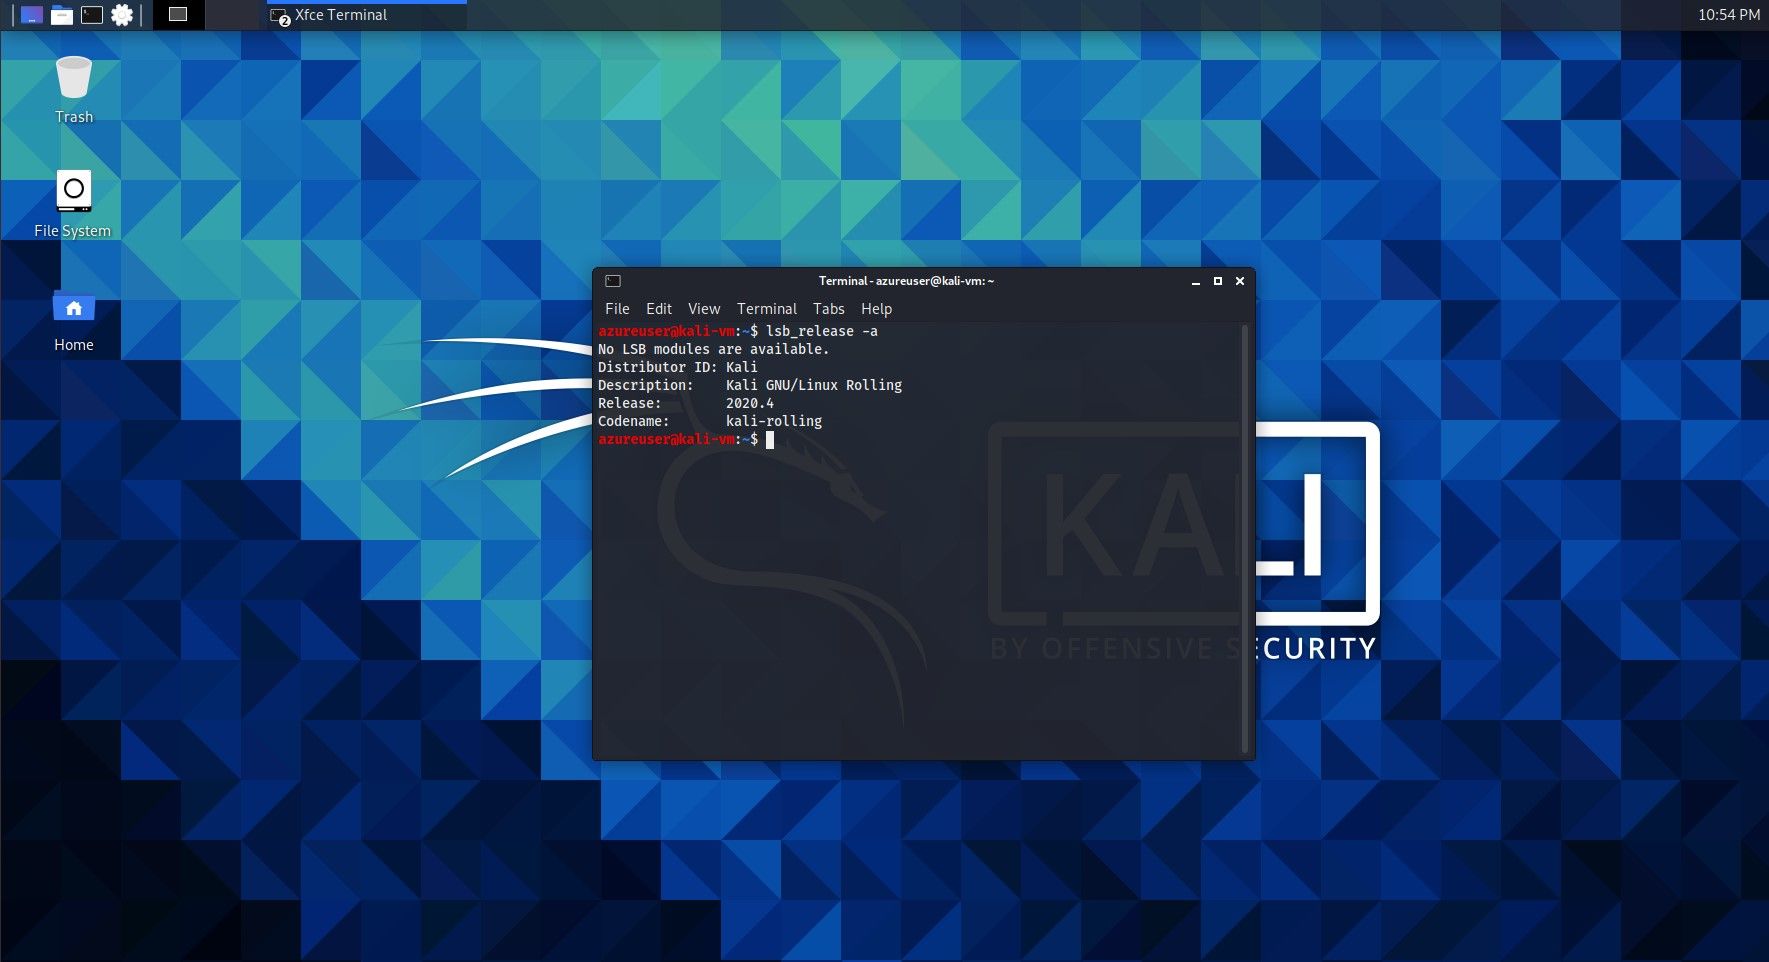 Adventures with Kali Linux on Azure #1